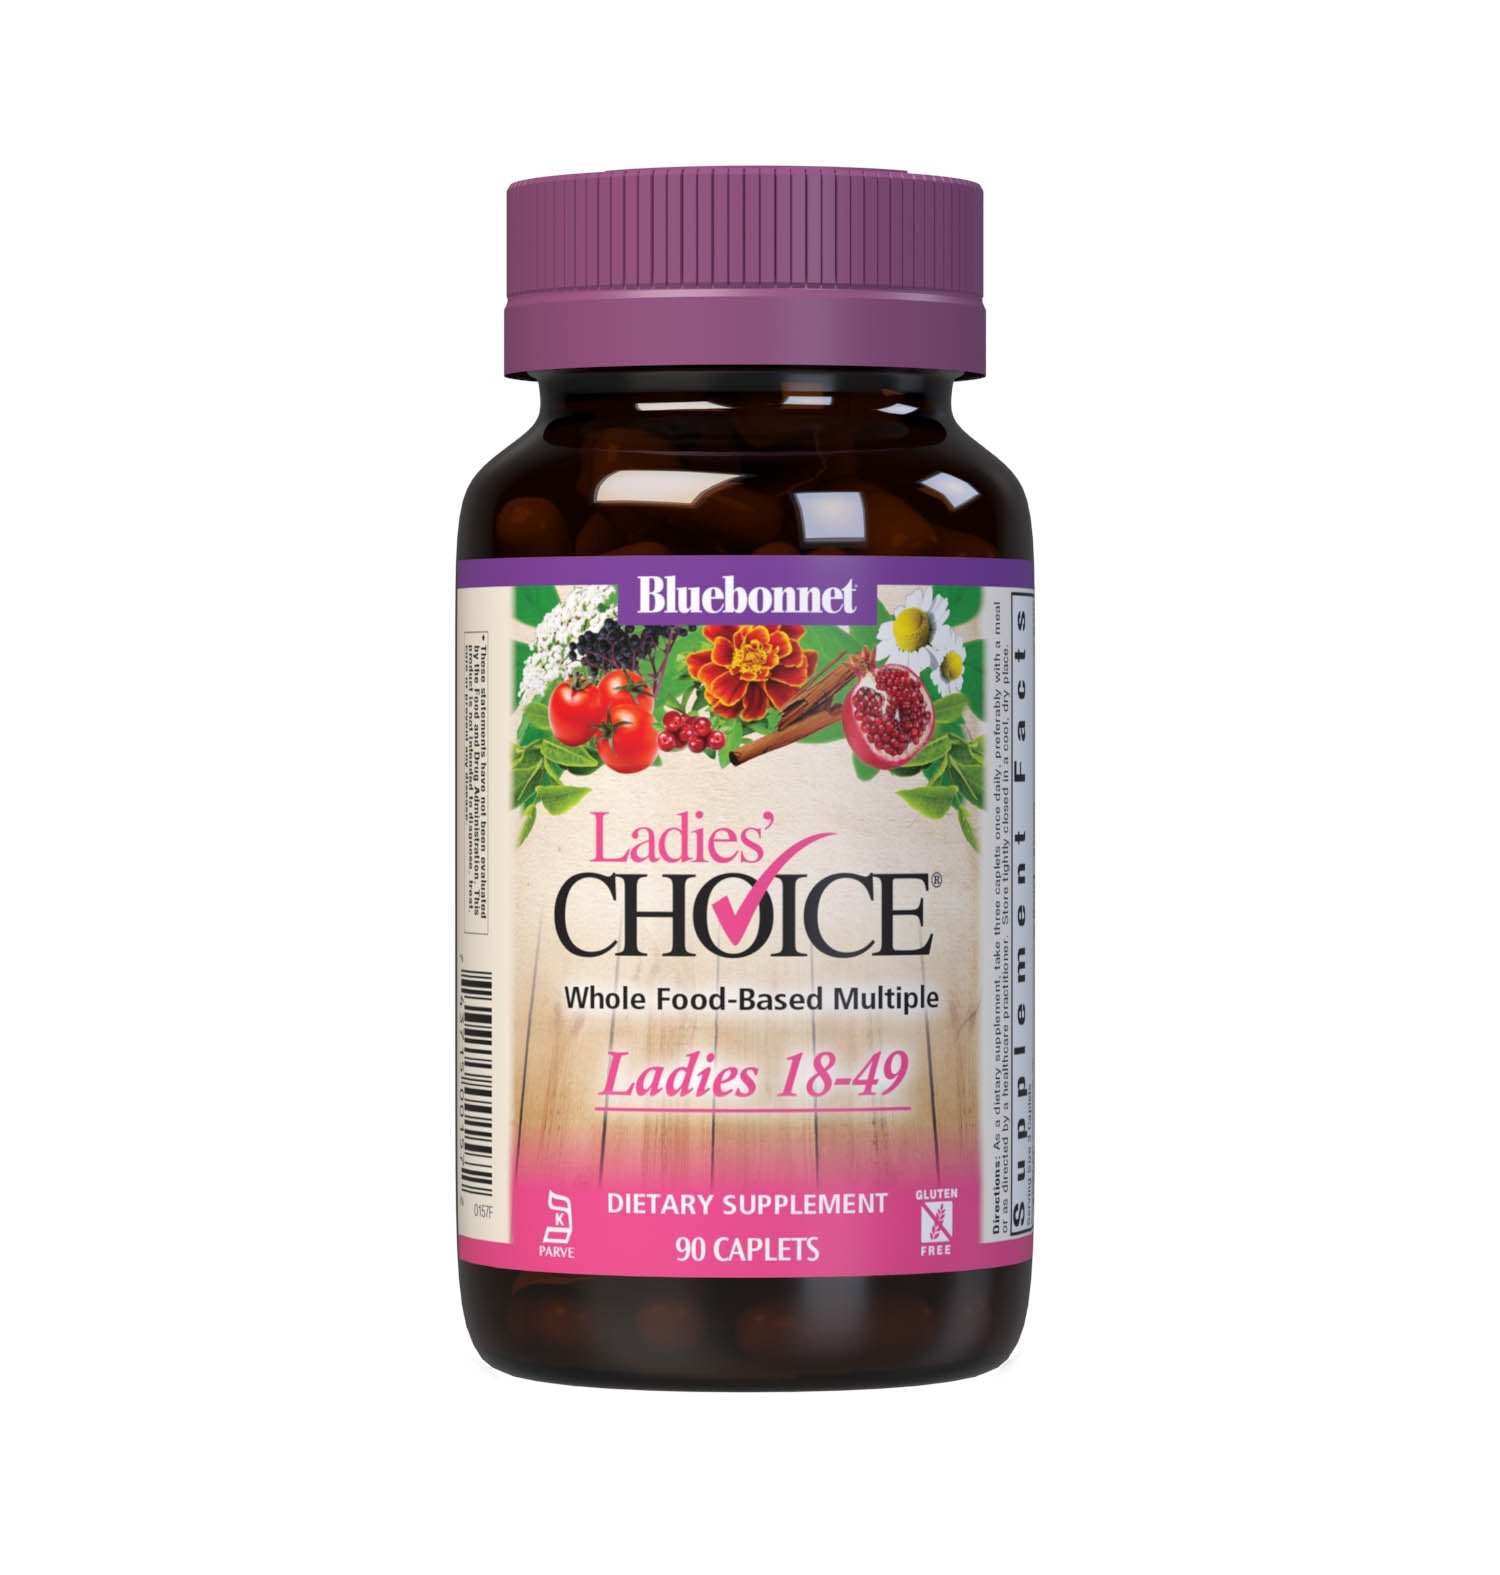 Bluebonnet’s Ladies’ Choice 90 Caplets are a three-a-day whole food-based multivitamin and multimineral dietary supplement designed for women 18 to 49. #size_90 count